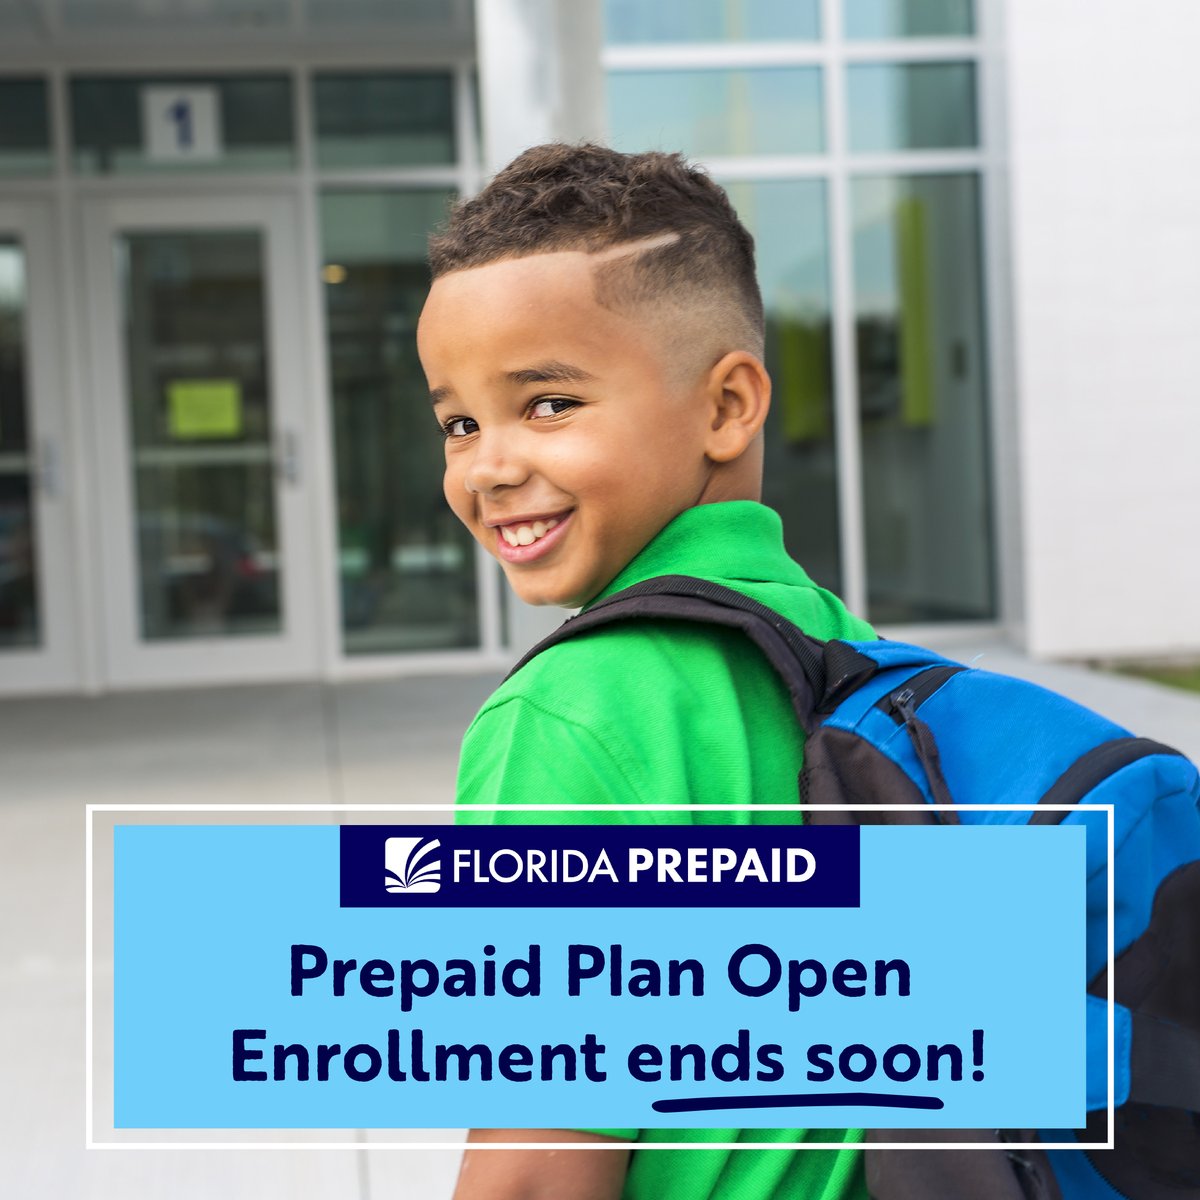 Parents, a friendly reminder: Enrollment for the Florida Prepaid Program closes soon! Invest in your child's future education today. Visit myfloridaprepaid.com for more information. Don't miss out on this opportunity! #FloridaPrepaid